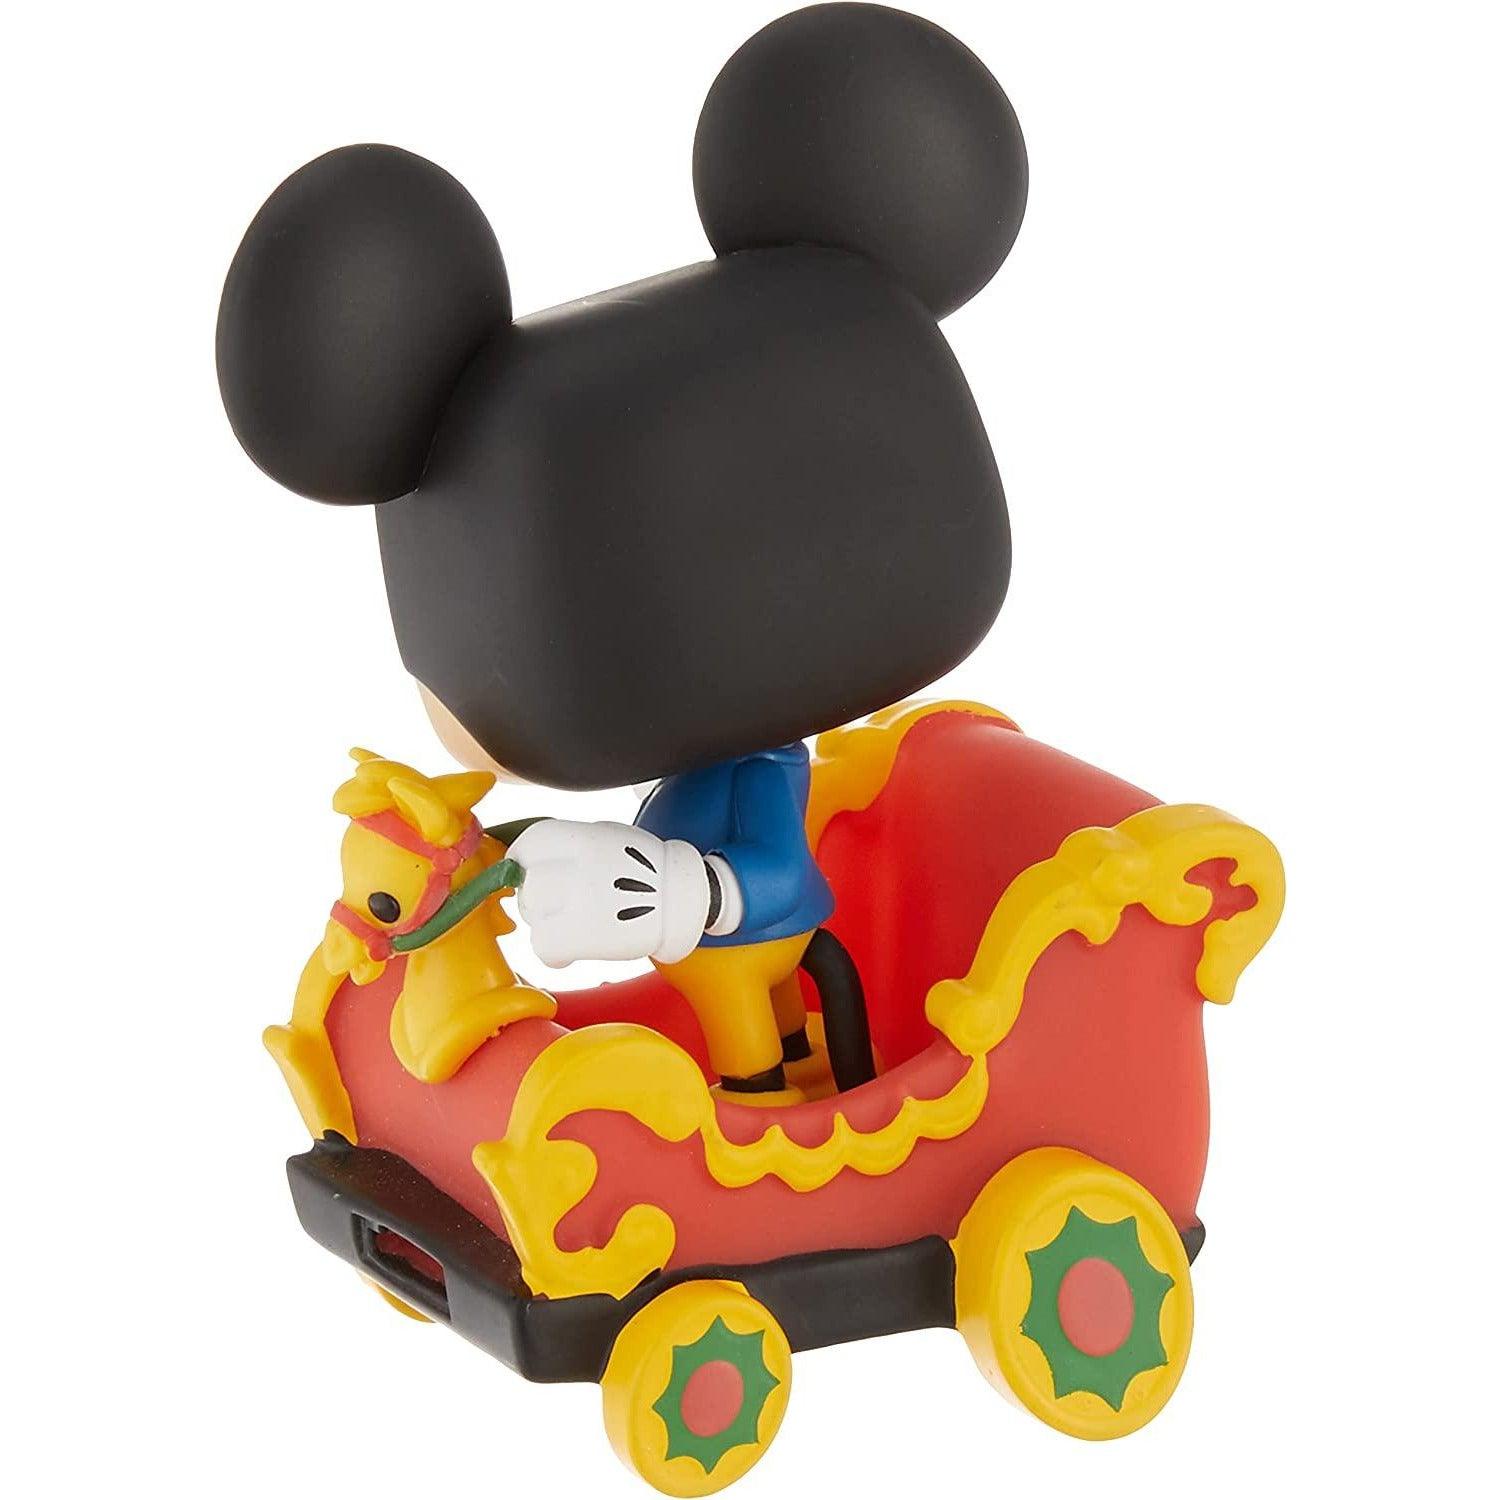 Funko Pop! Disney: Casey Jr. Circus Train Ride - Mickey Mouse in Car - BumbleToys - 18+, 5-7 Years, Action Figures, Boys, Funko, Pre-Order